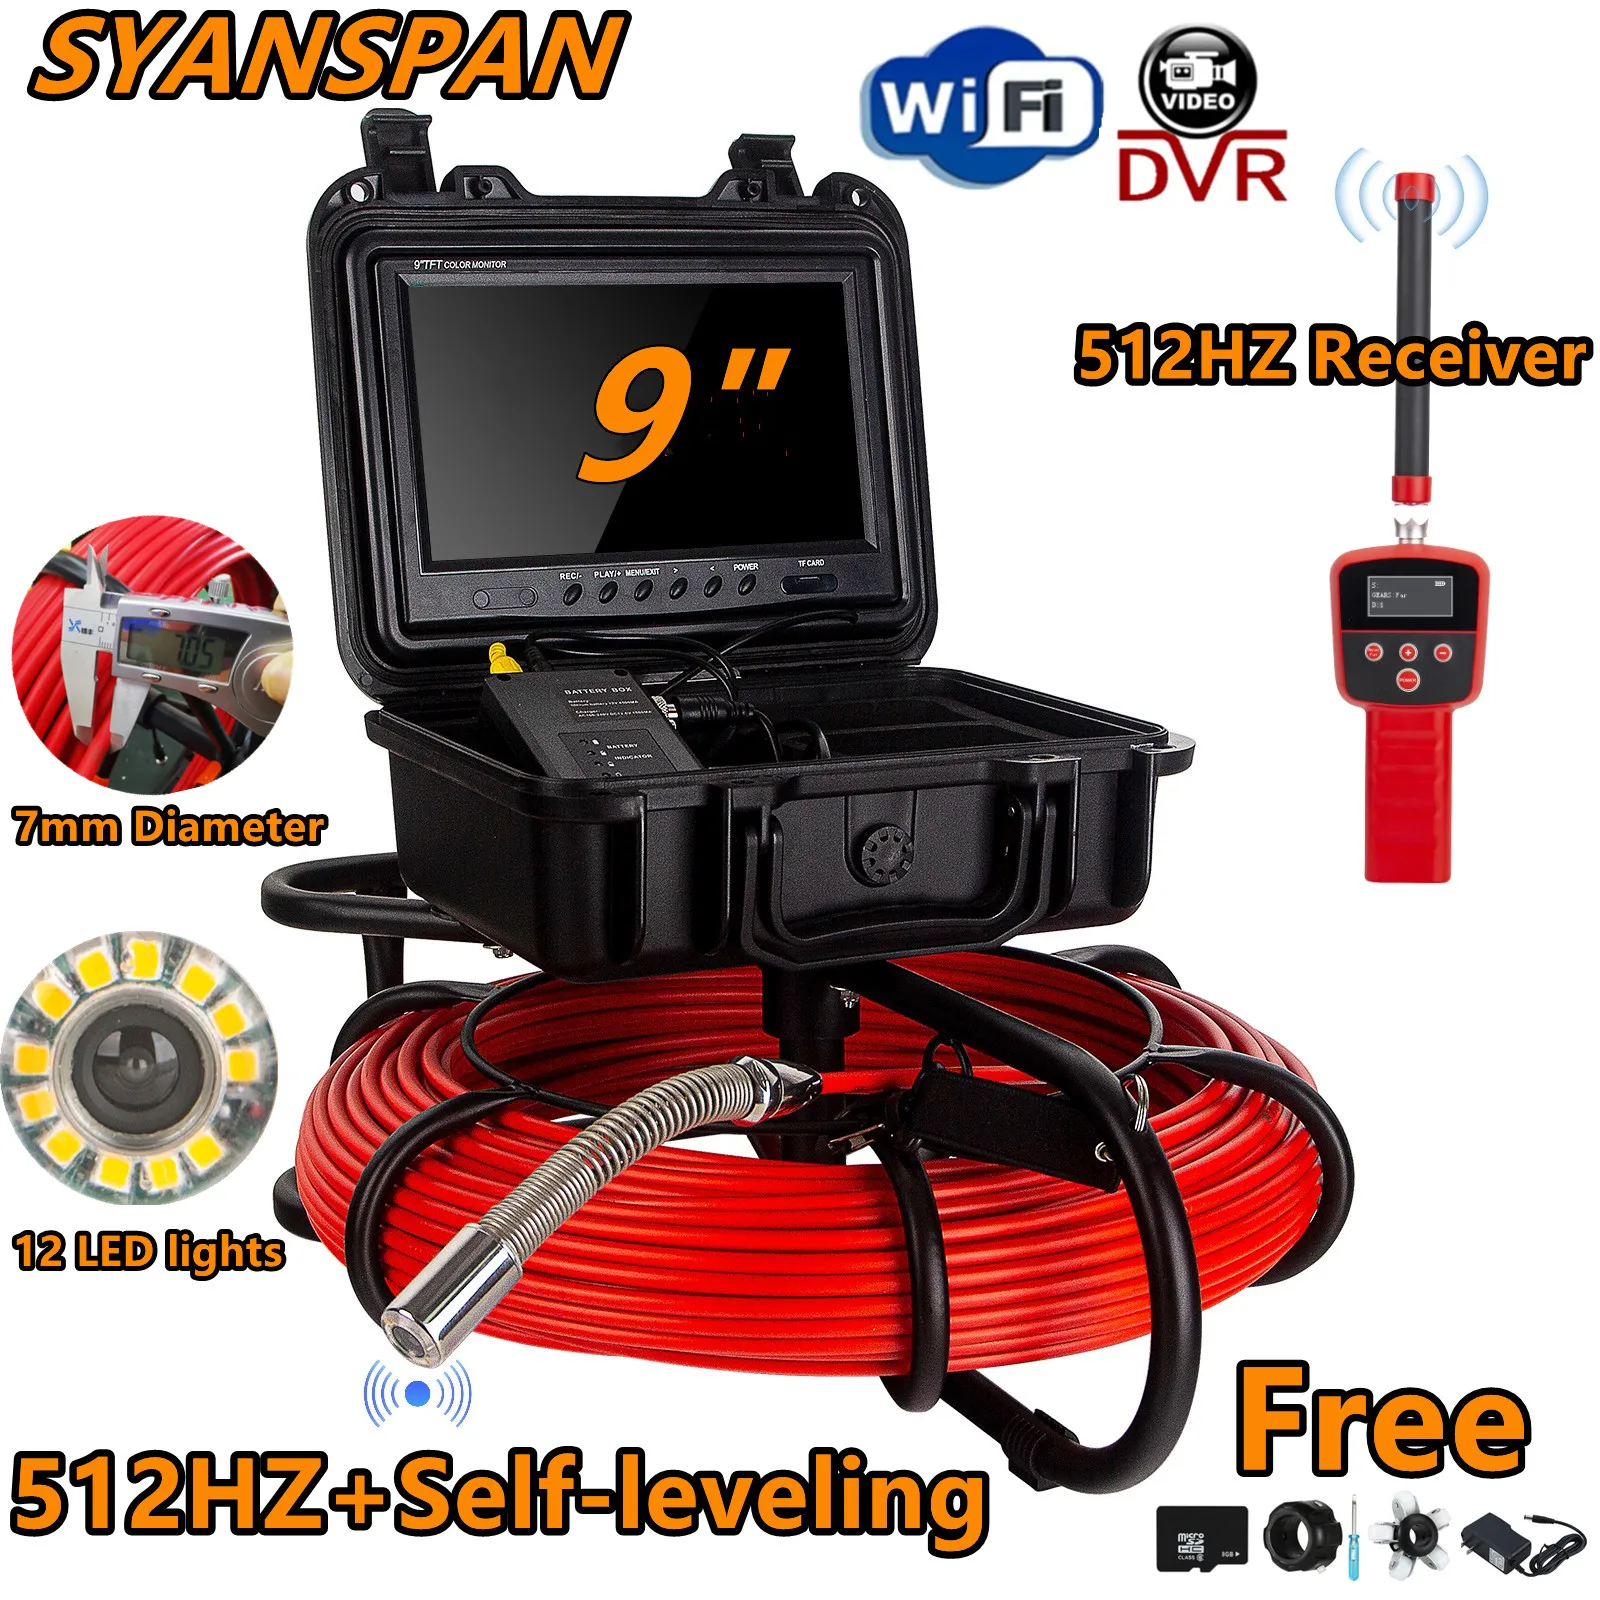 512HZ Self-leveling And Signal Receiver DVR/WiFi SYANSPAN Pipe Inspection Camera 9